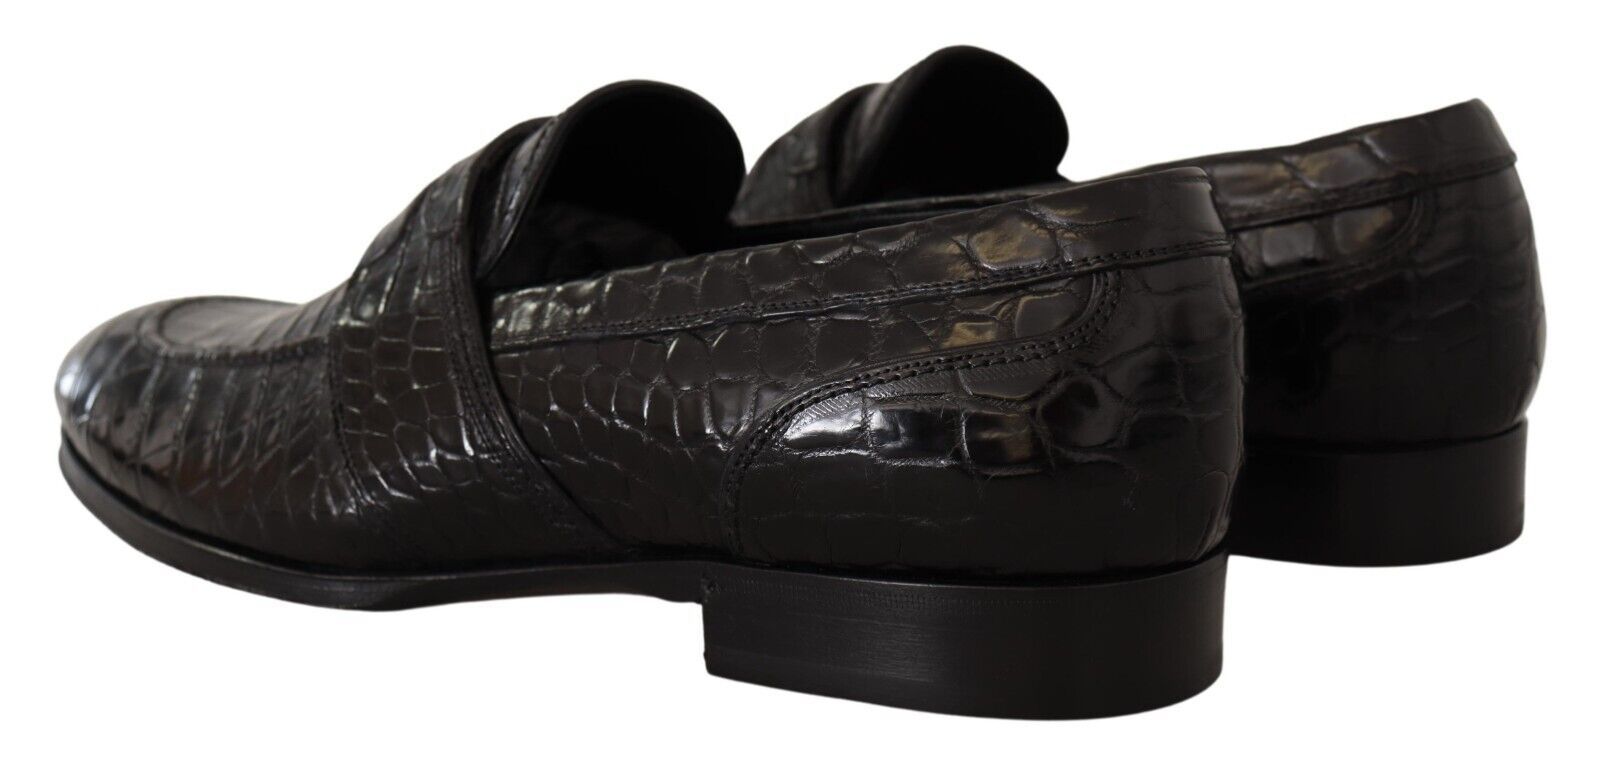 Exquisite  Crocodile Leather Slip-On Moccasin Shoes